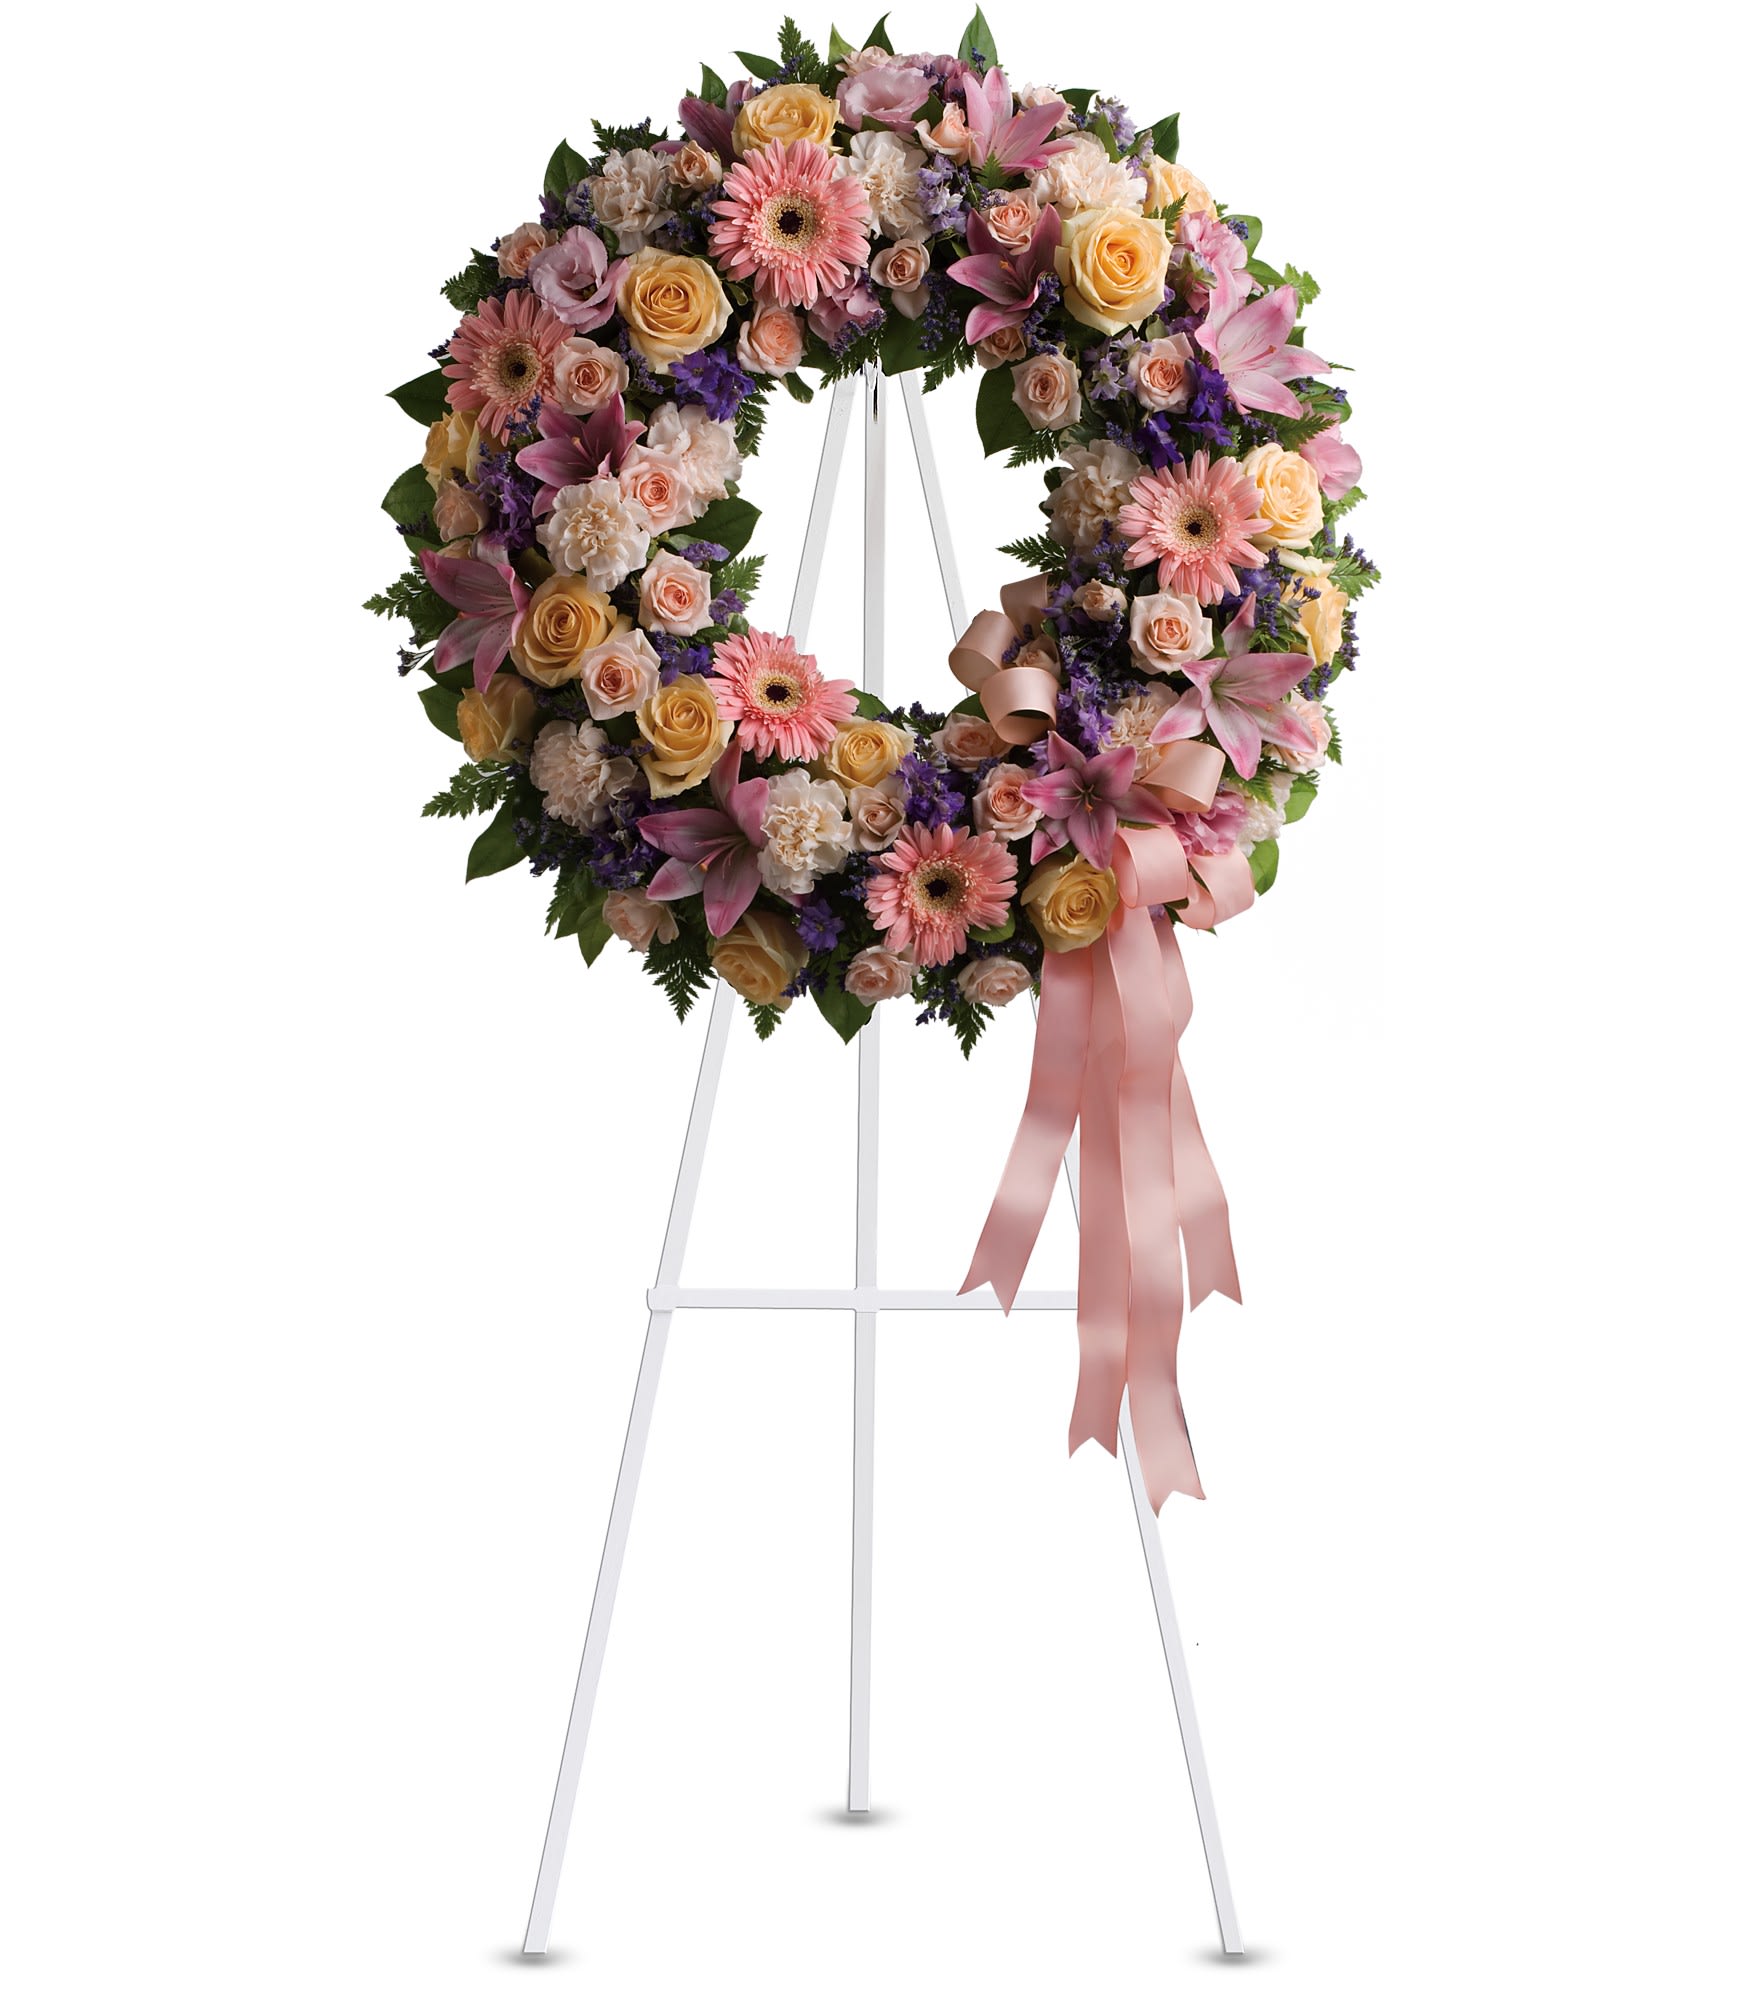 Graceful Wreath (T239-1A) - Family and friends will recollect how special their loved one was with this gentle and timeless circle of fragrant blooms to celebrate sweet memories. 